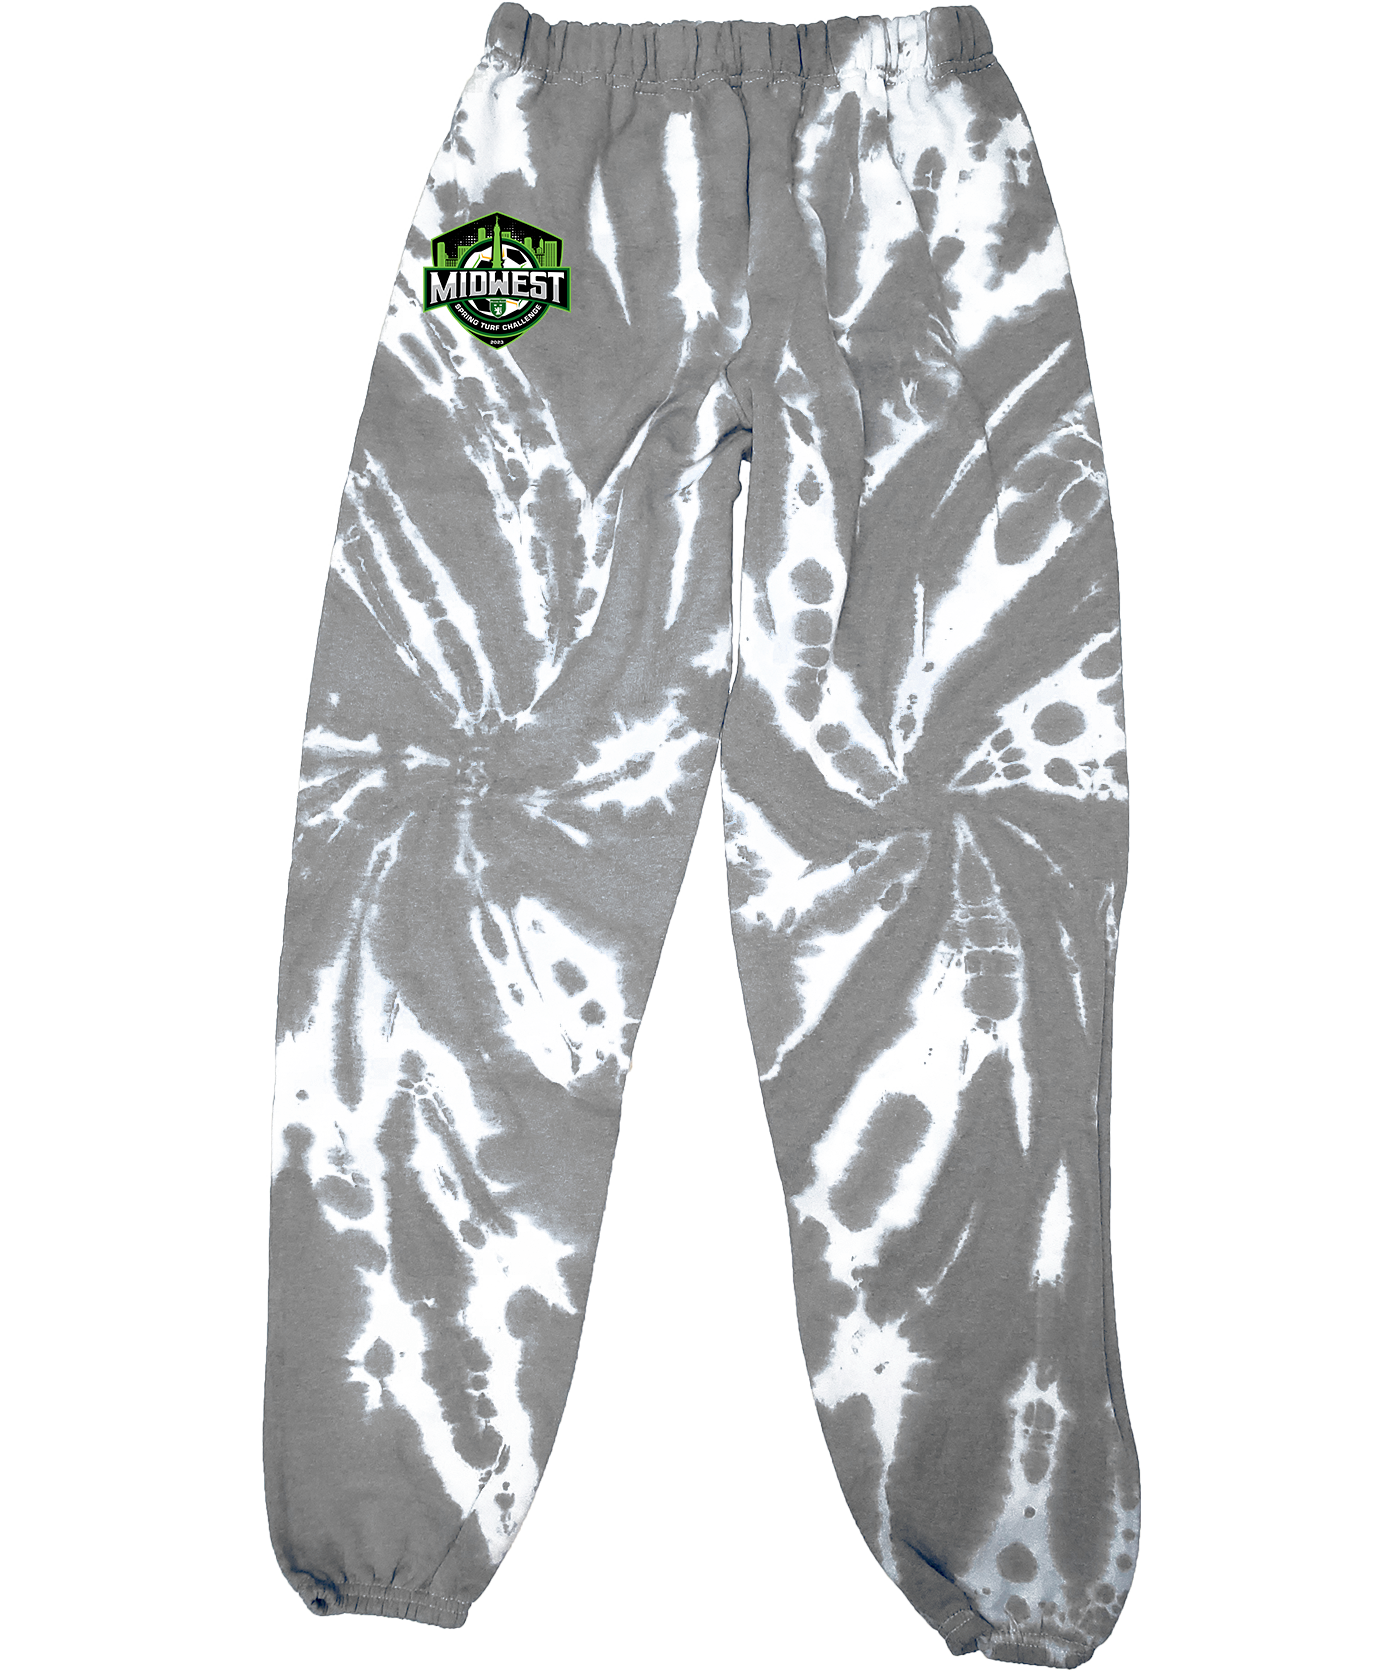 SWEAT PANTS - 2023 Midwest Spring Turf Challenge